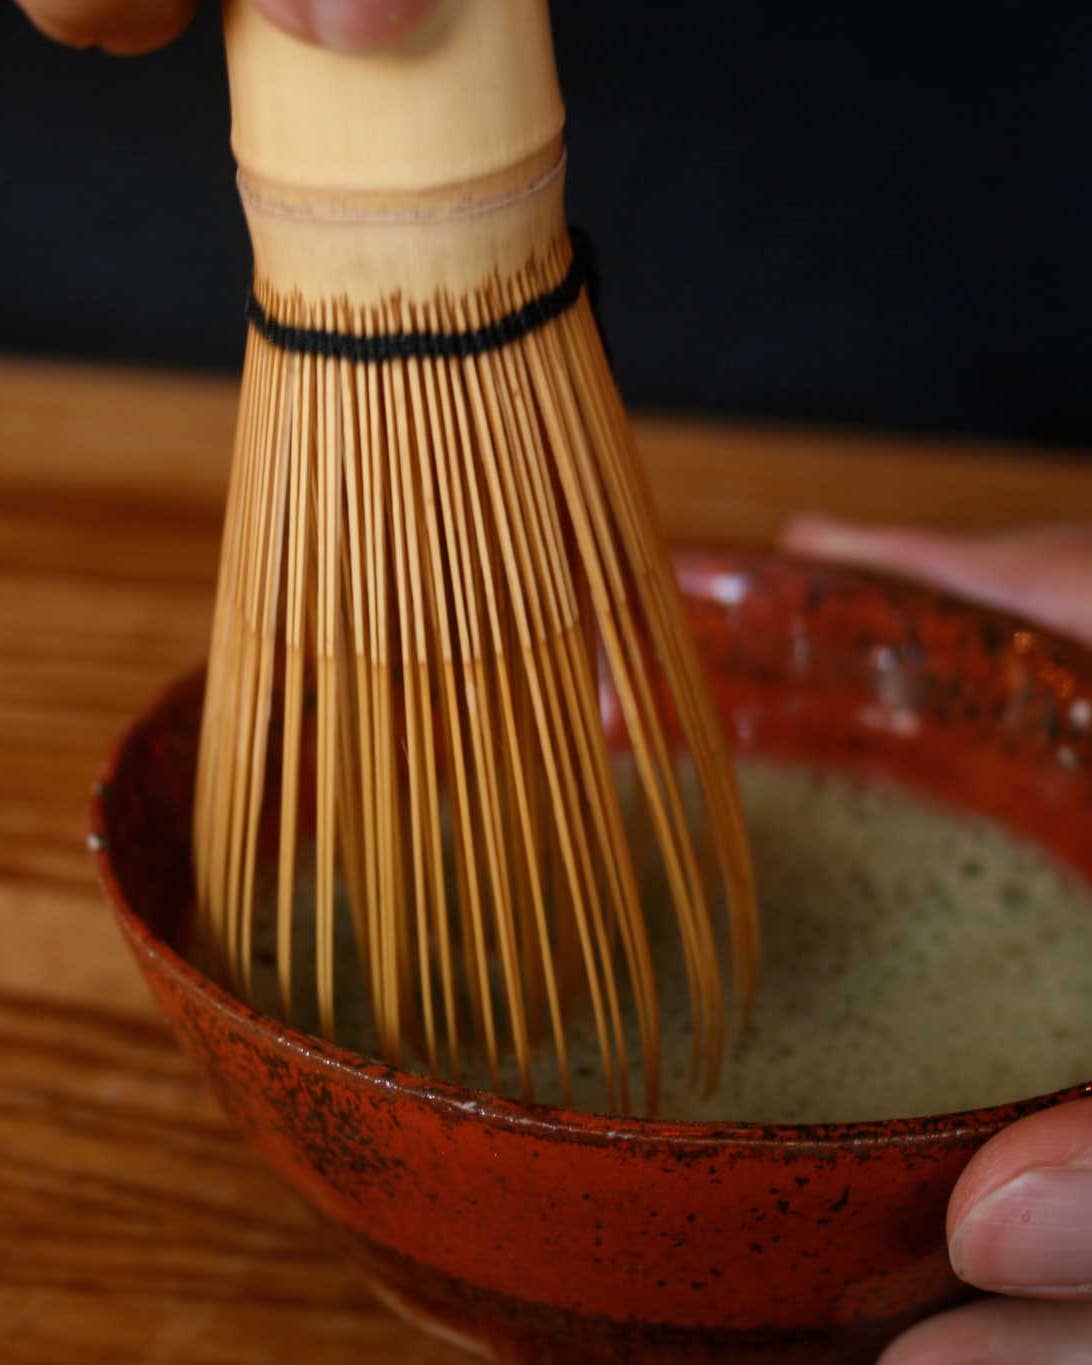 The Mesmerizing, Centuries-Old Process of Making Bamboo Matcha Whisks by Hand